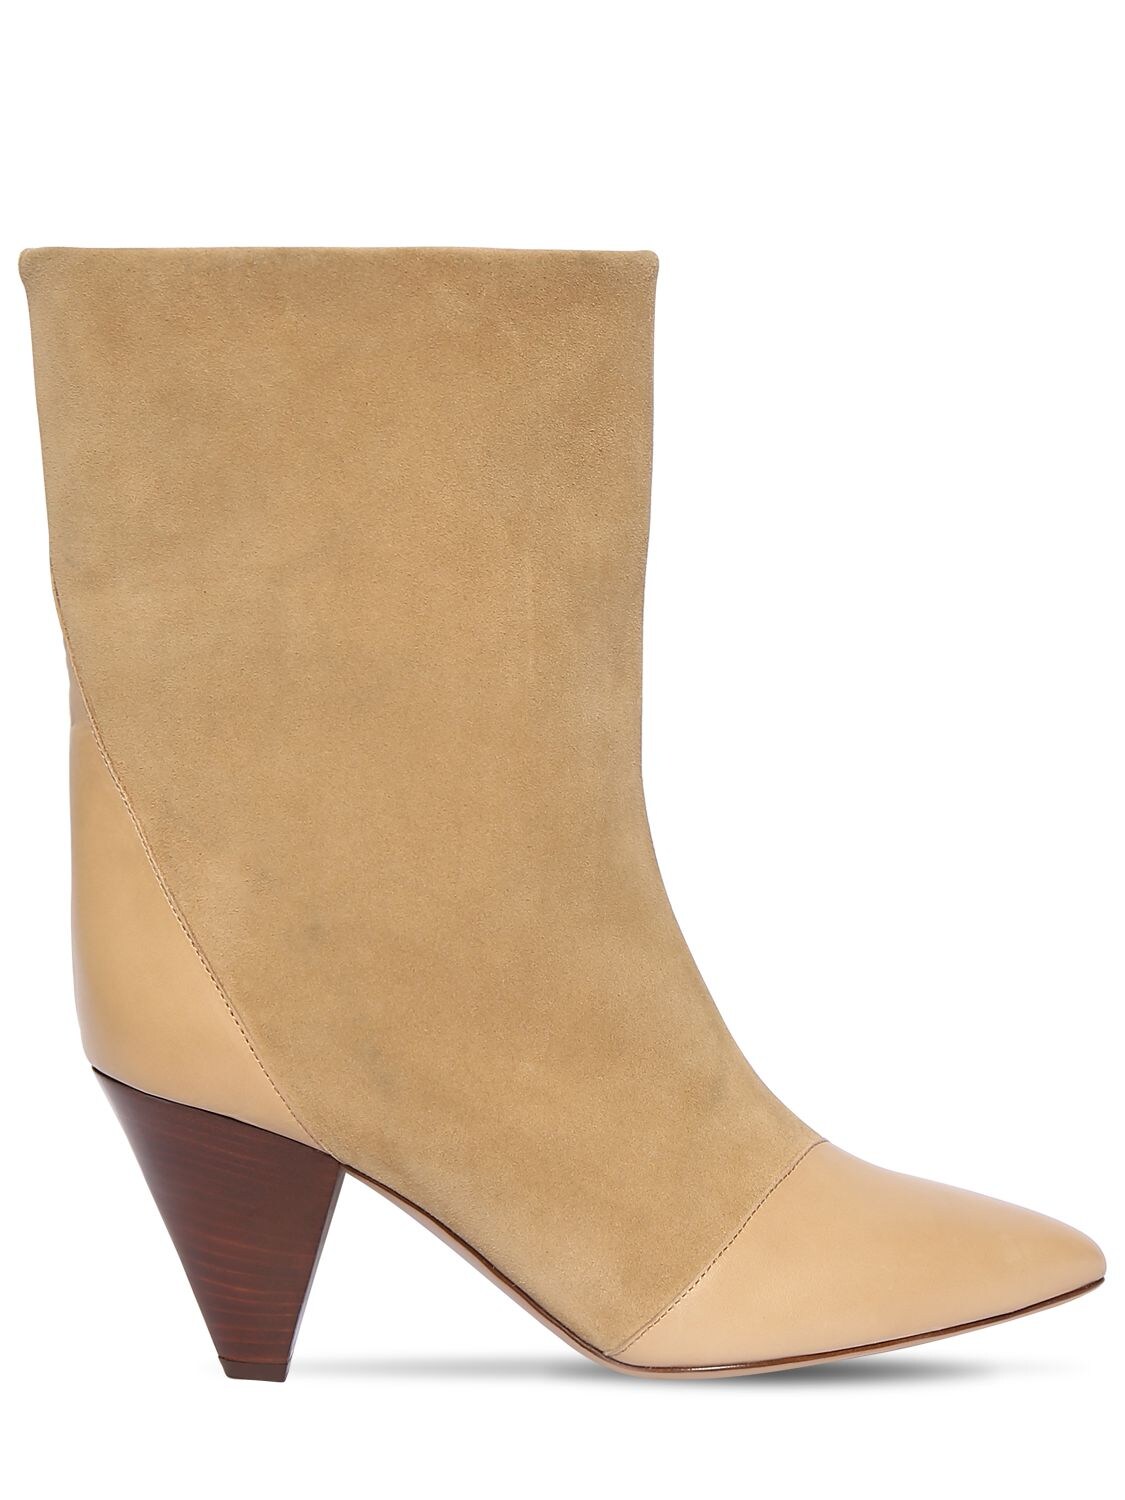 Mm Lillis Suede & Leather Ankle Boots - ISABEL MARANT - Modalova